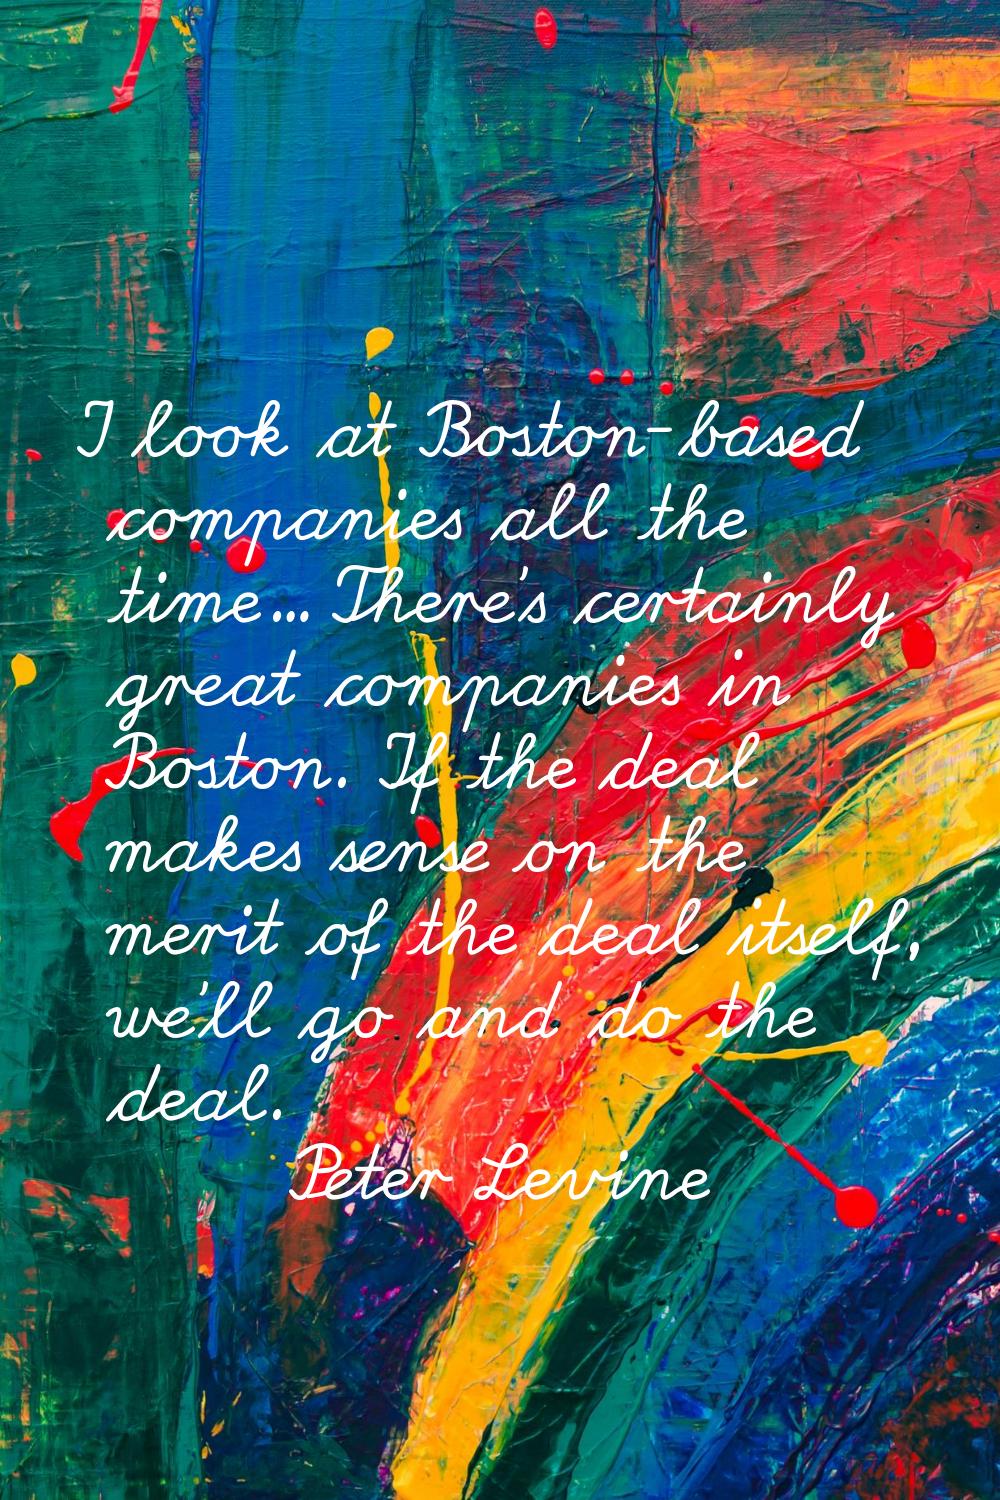 I look at Boston-based companies all the time... There's certainly great companies in Boston. If th